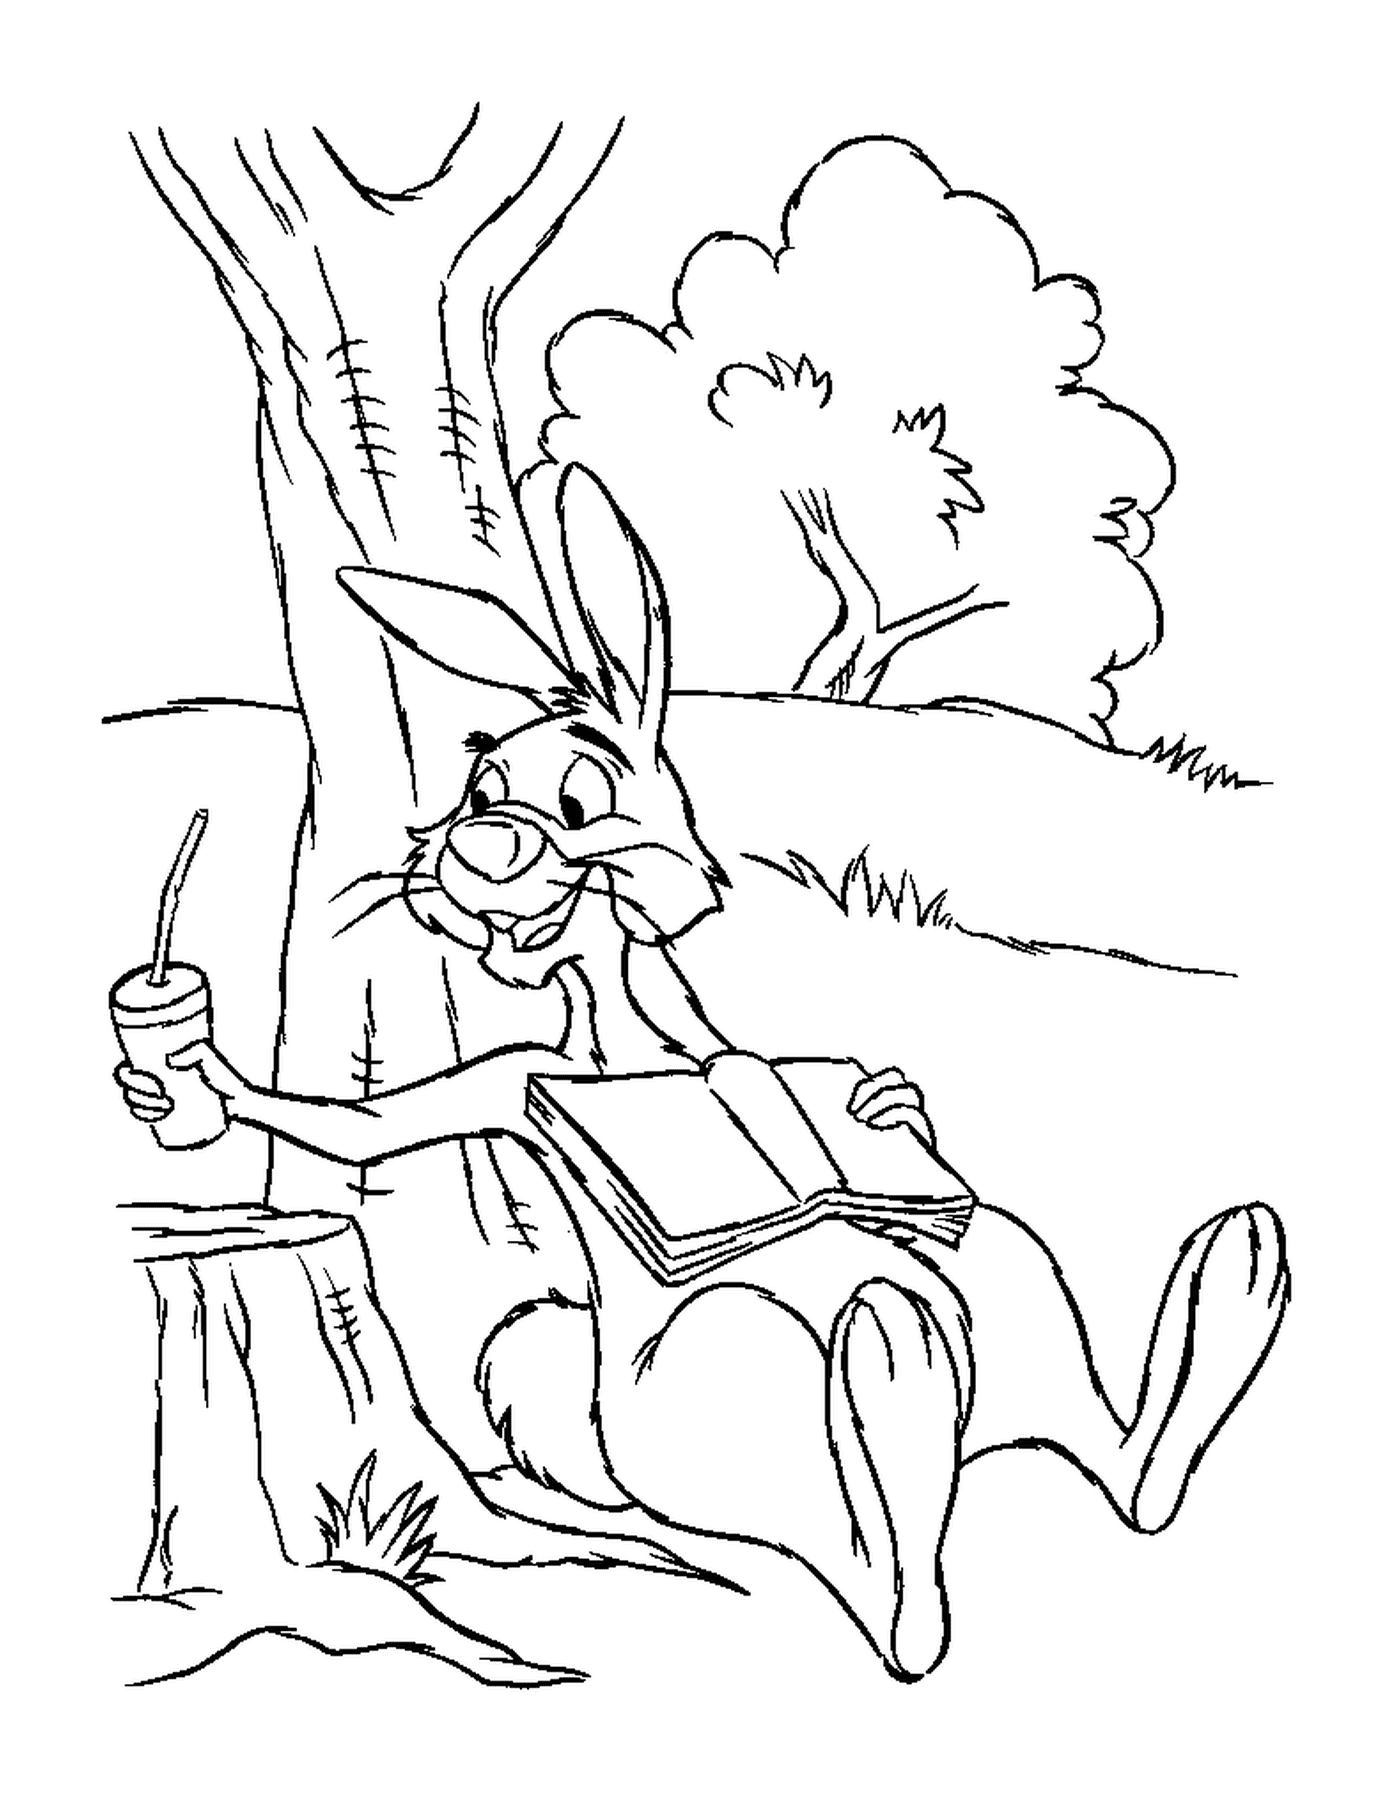  A rabbit sitting on a stump near a tree with carrot juice 